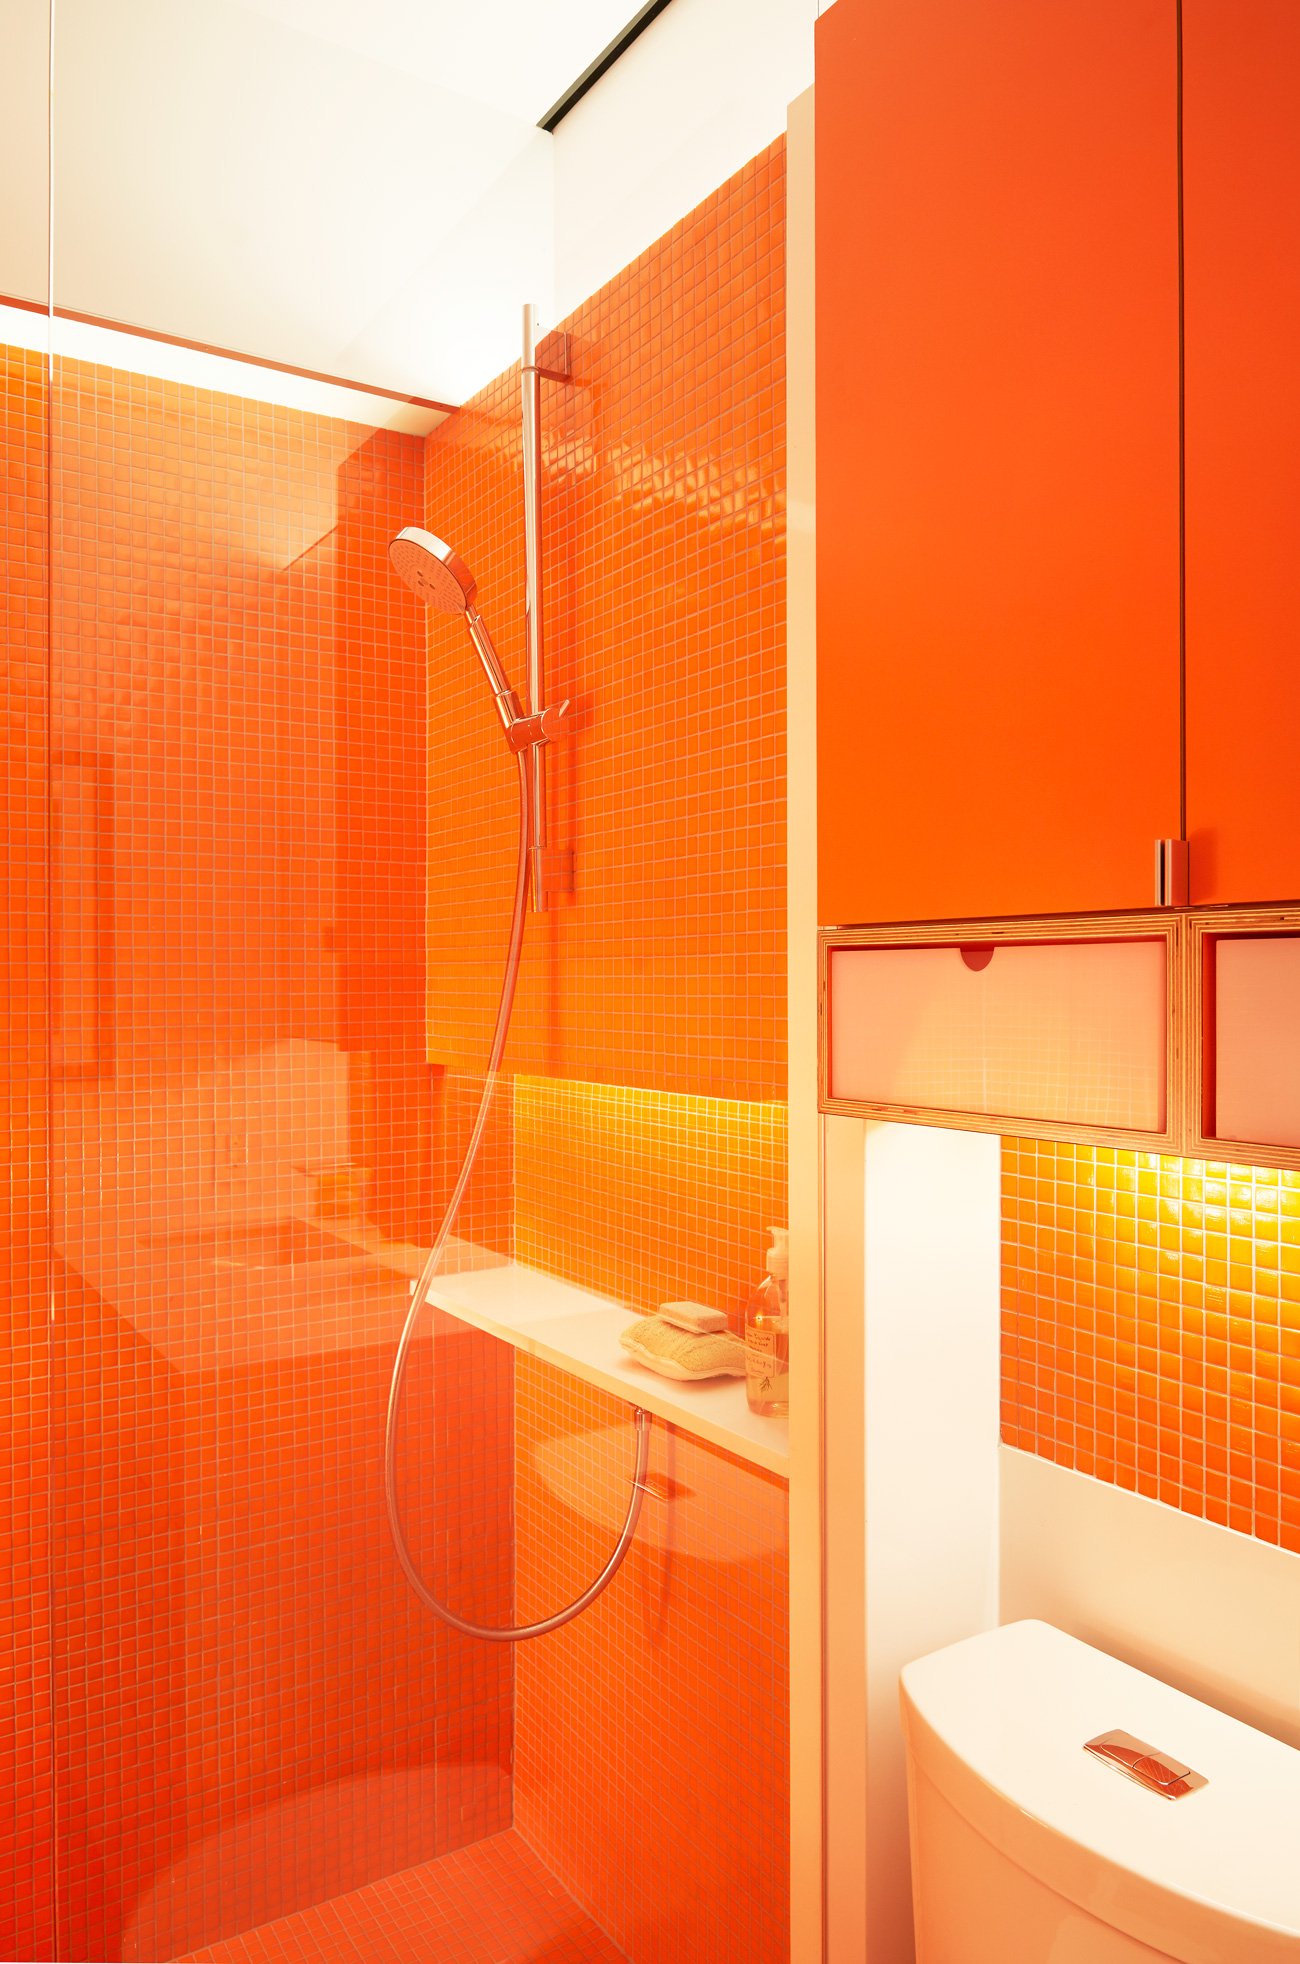 The bathrooms are colour blocked, one in yellow, the other in orange. The designer used miniature molten mosaic tiles from Trend USA in both rooms.